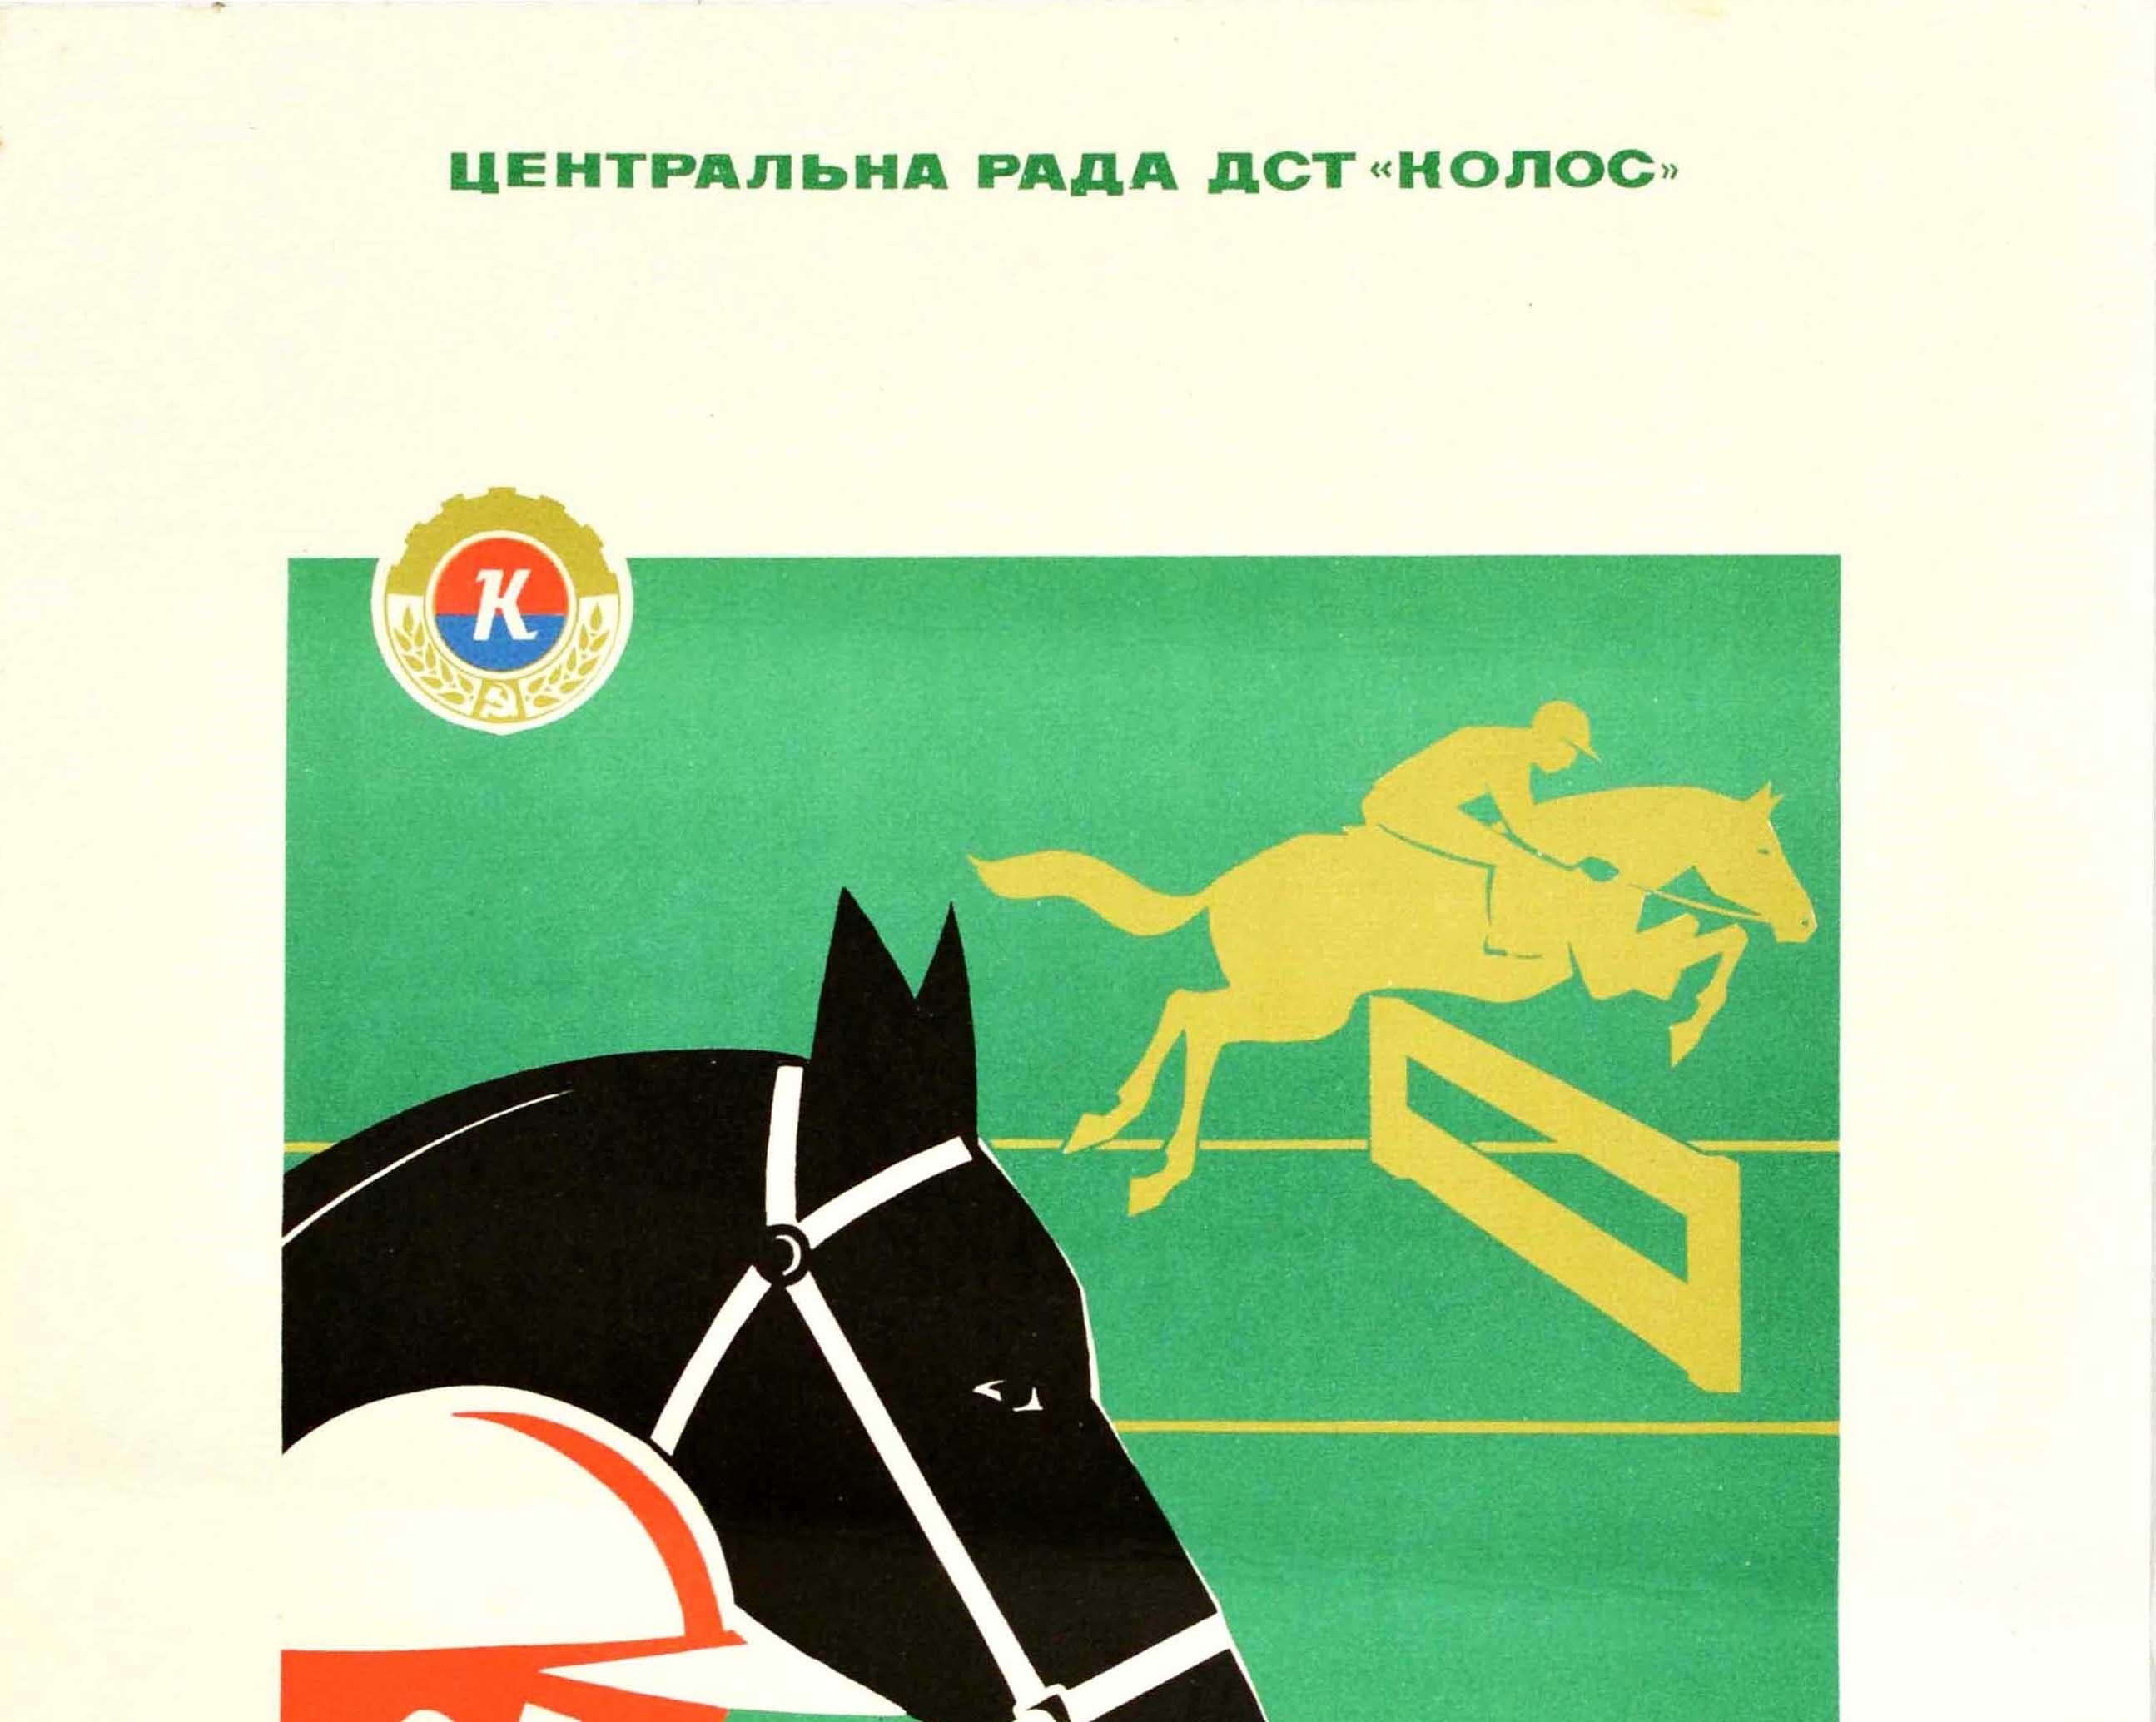 Original Vintage Poster Equestrian Sport USSR Horse Show Jumping Art DST Kolos - Print by Unknown